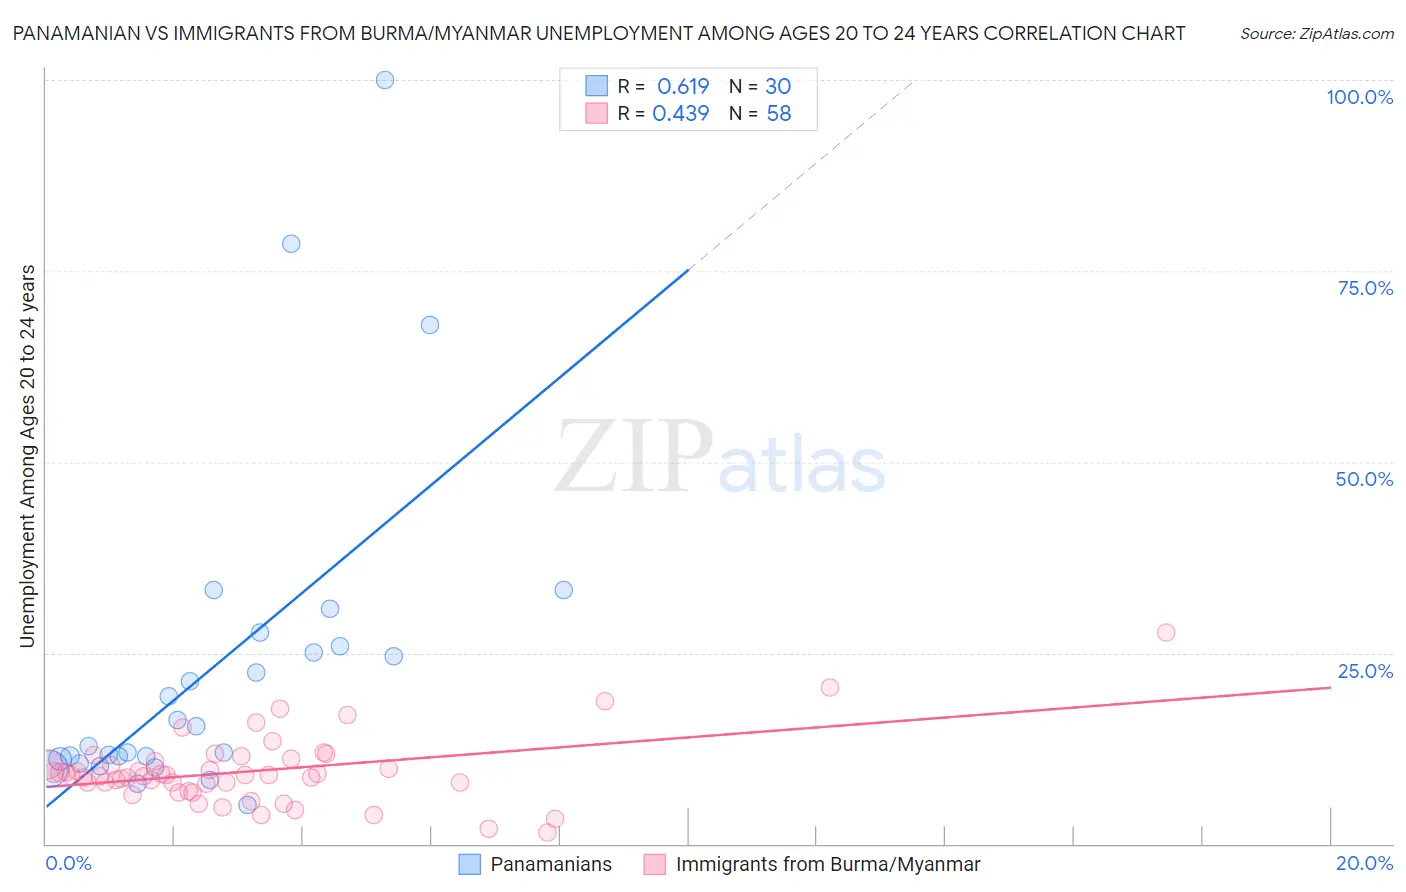 Panamanian vs Immigrants from Burma/Myanmar Unemployment Among Ages 20 to 24 years